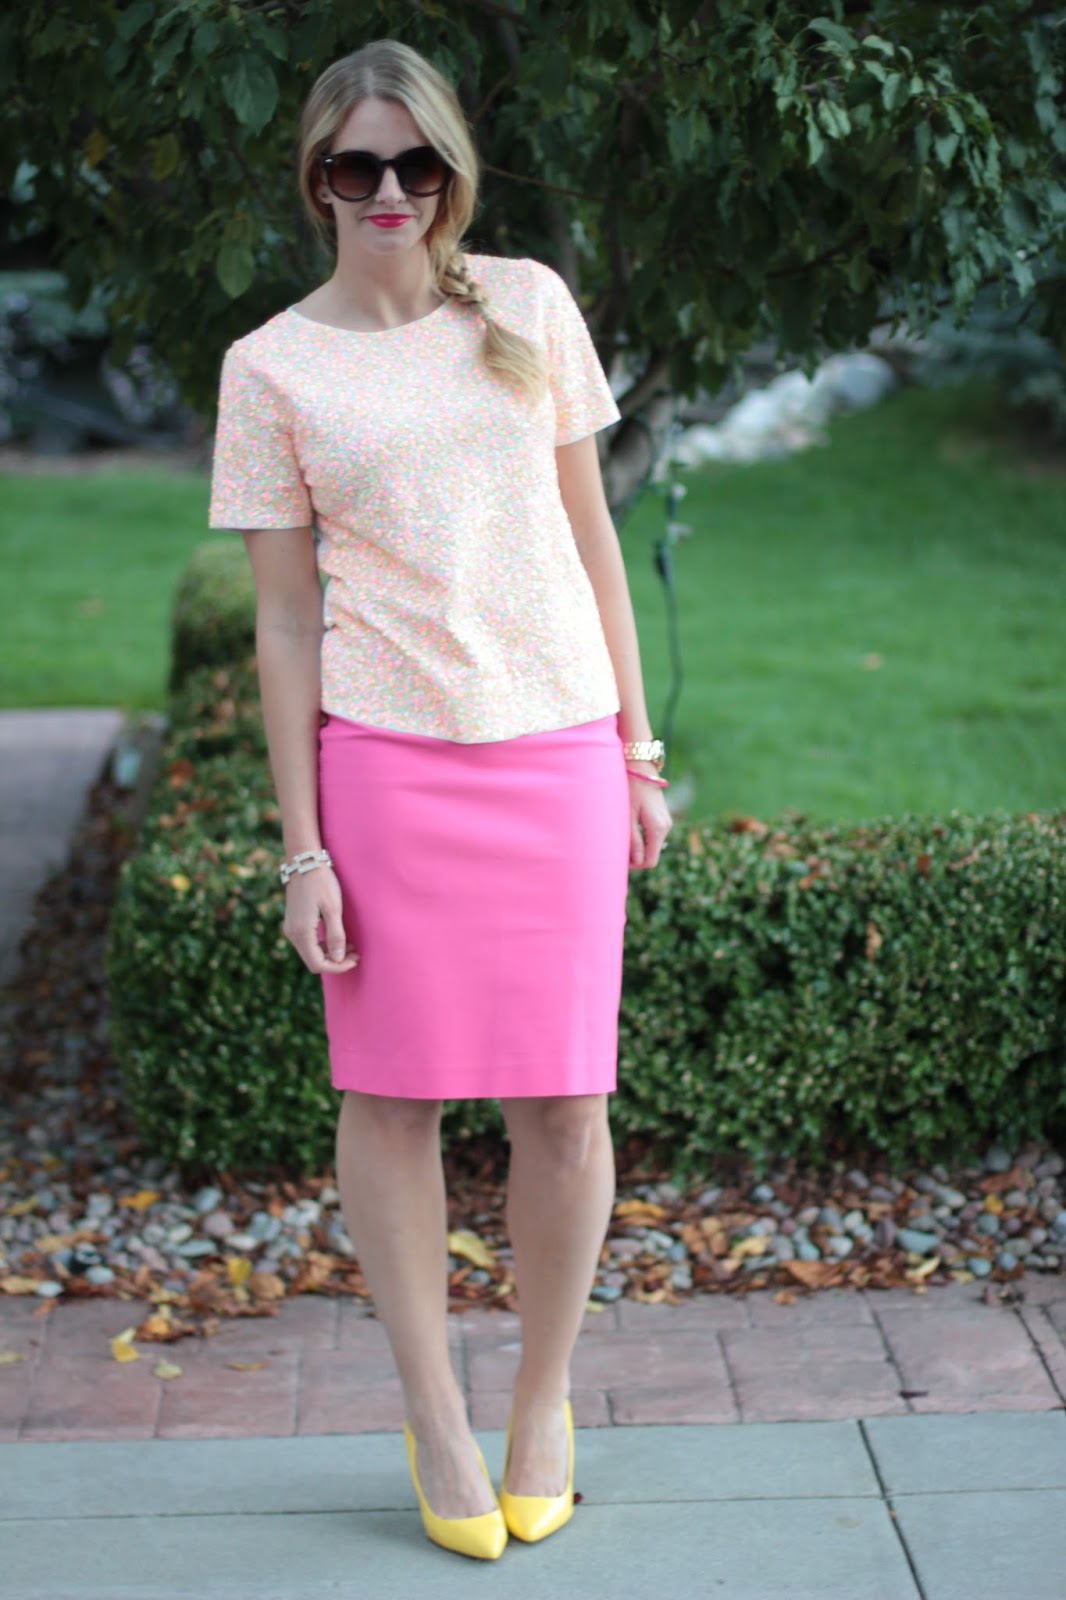 my wardrobe staples: sequins, hot pink, and all things girly